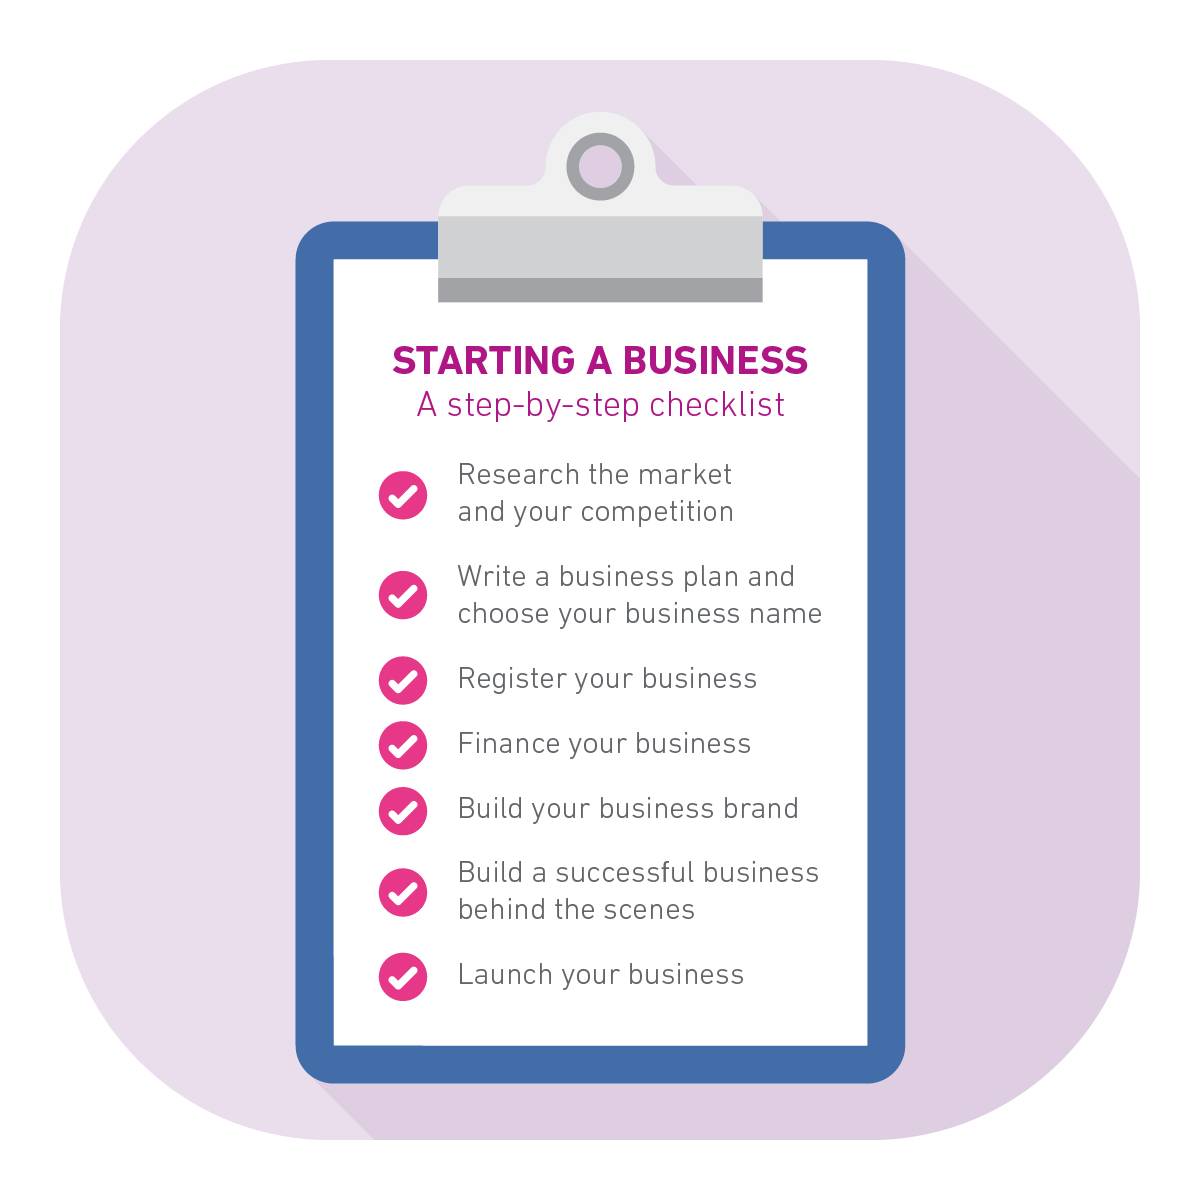 Must Have Items For Your Small Business  Essentials, Tips & Things Every  Business Needs To Start 